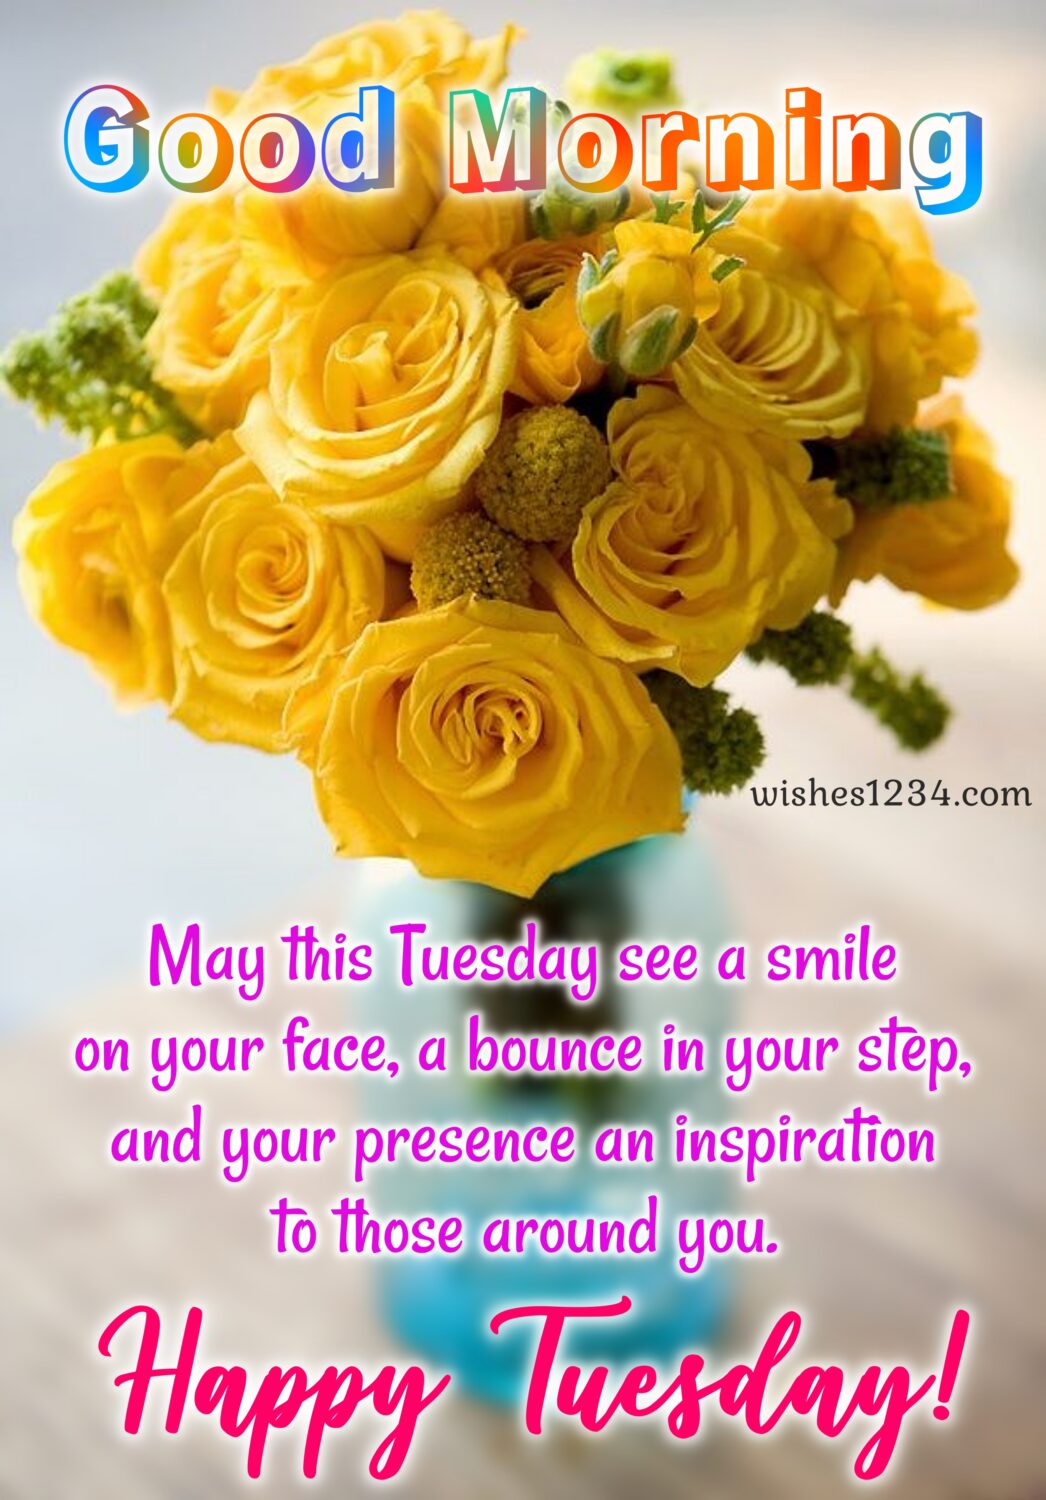 Happy Tuesday with yellow roses bunch in jar, Happy Tuesday images.